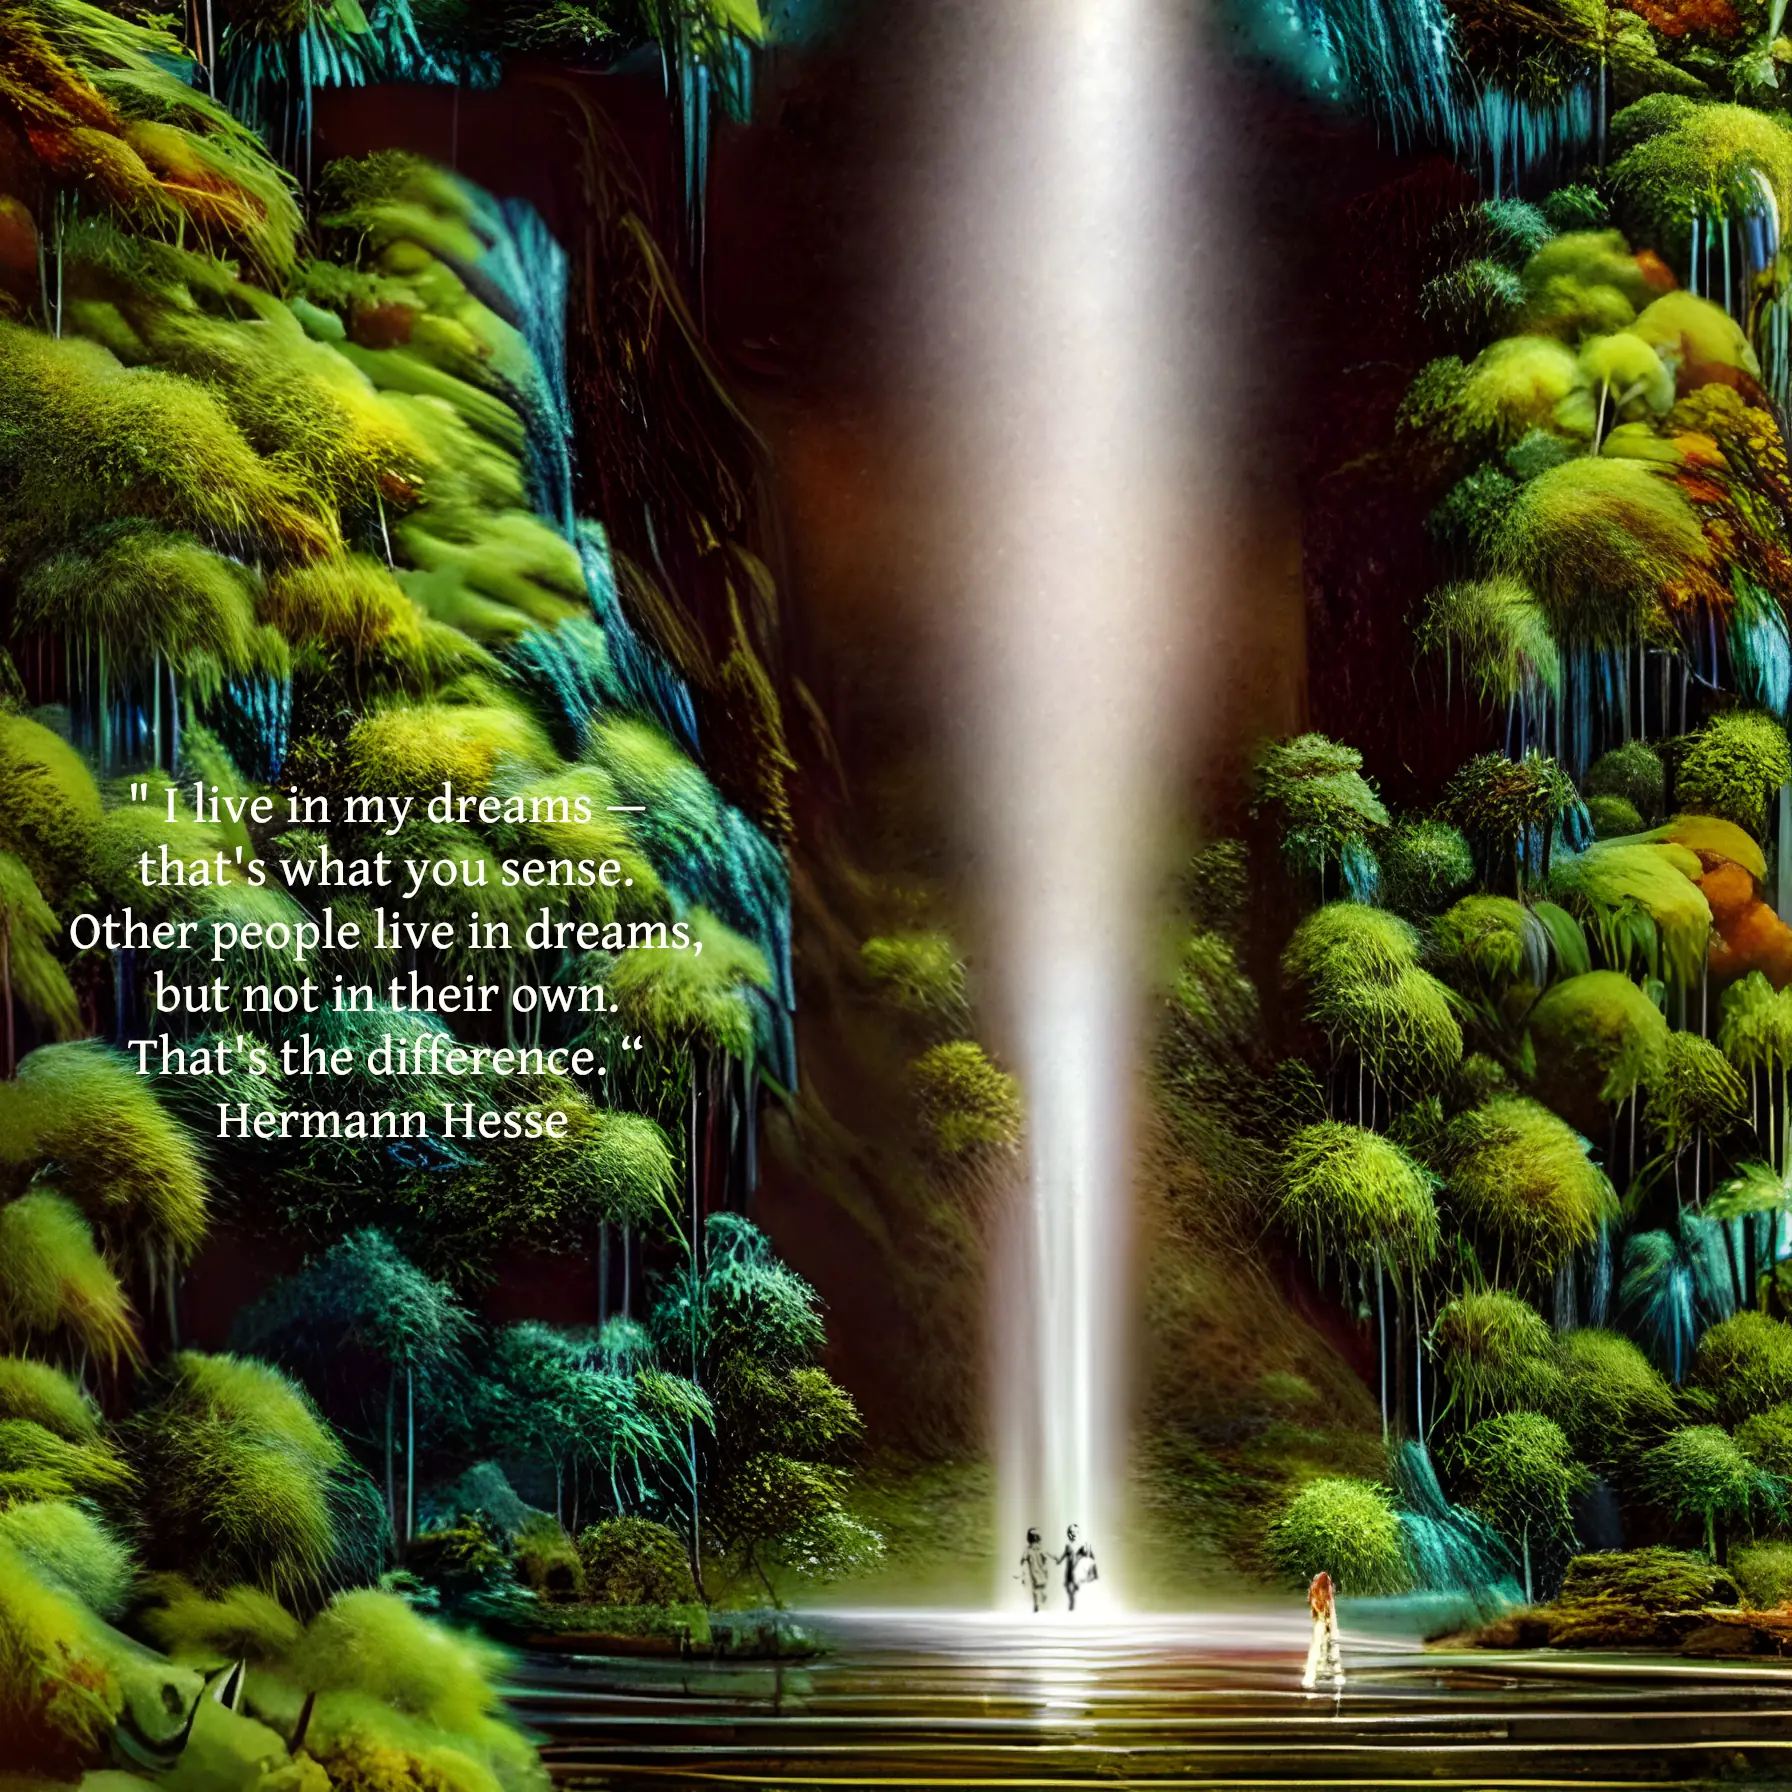 An artistic rendering of a misty waterfall descending into a shallow lake in a beautiful forest. There is a woman in walking in the lake. The quote reads: "I live in my dreams — that's what you sense. Other people live in dreams, but not in their own. That's the difference.“ Hermann Hesse